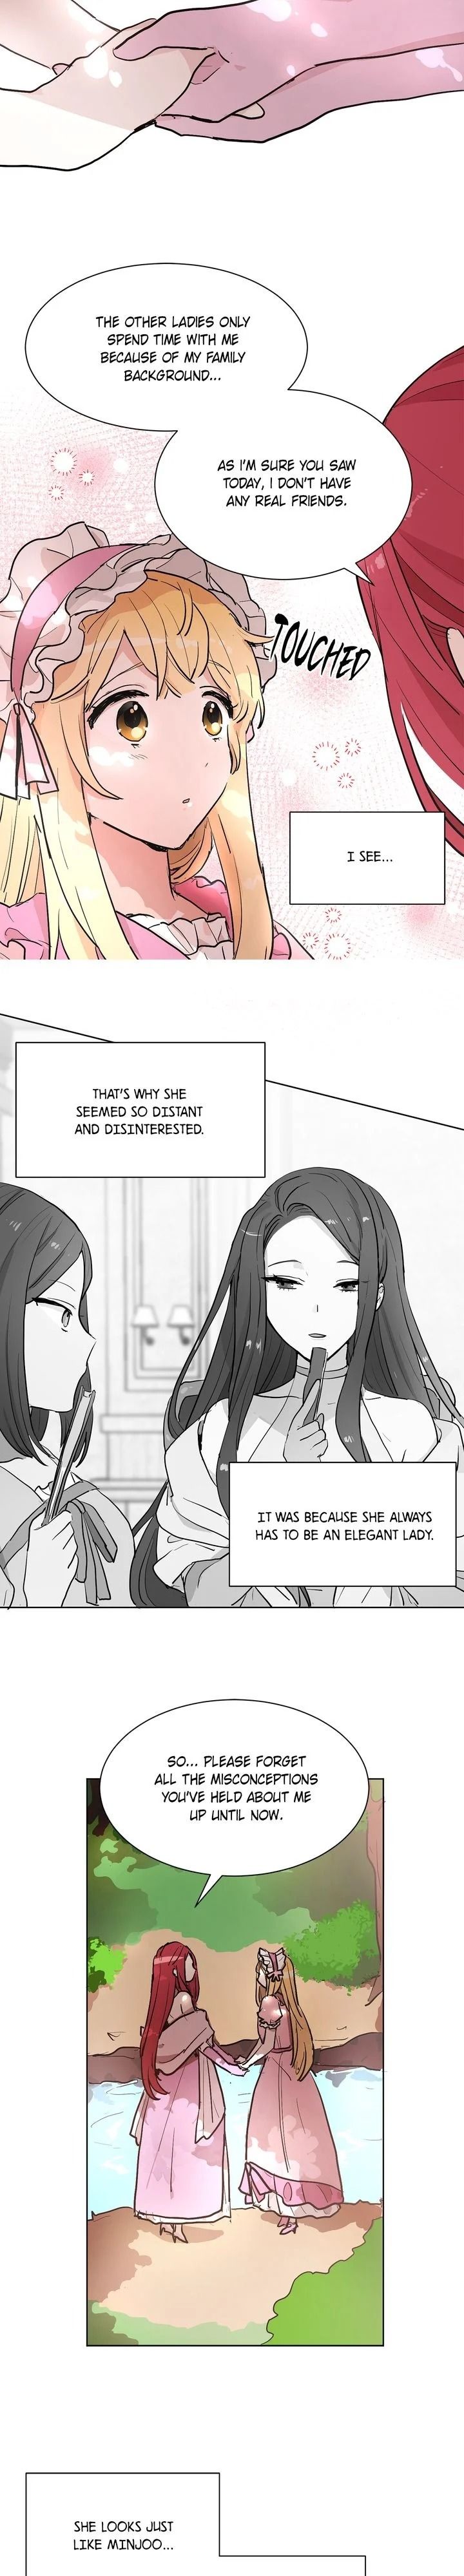 Cat's Bride Chapter 53 page 2